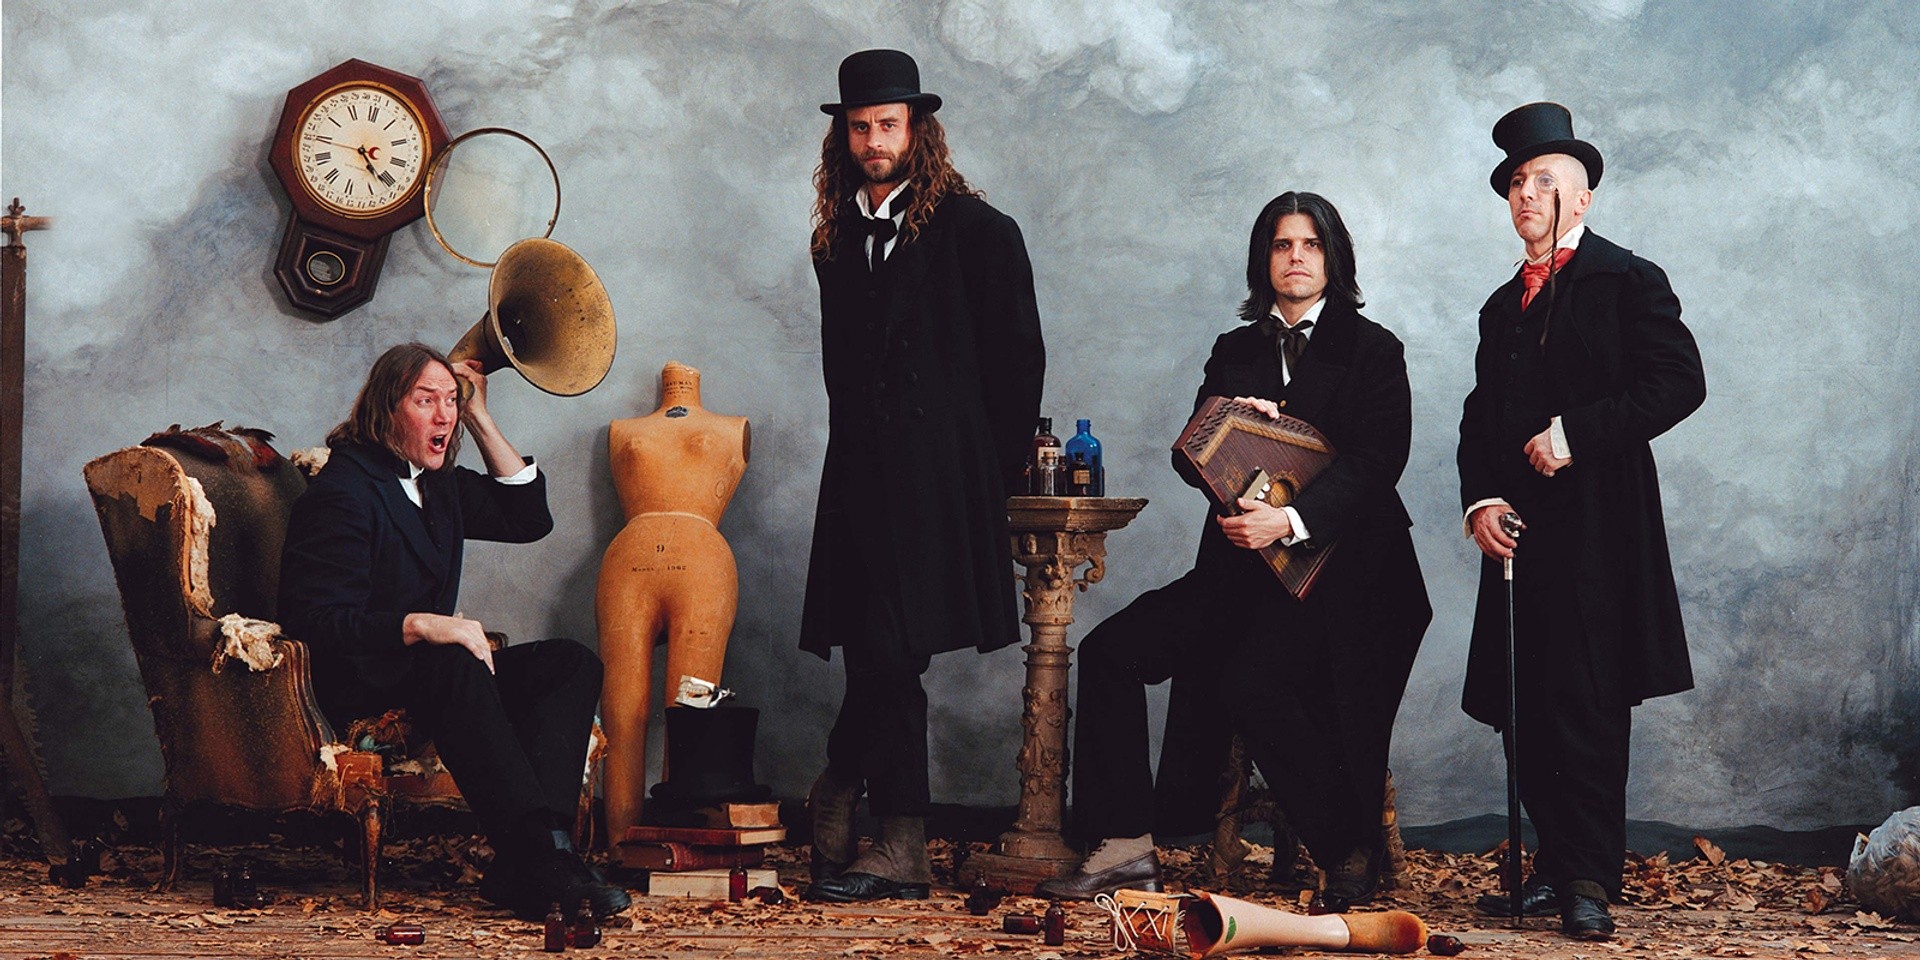 TOOL's first album in 13 years is finally complete